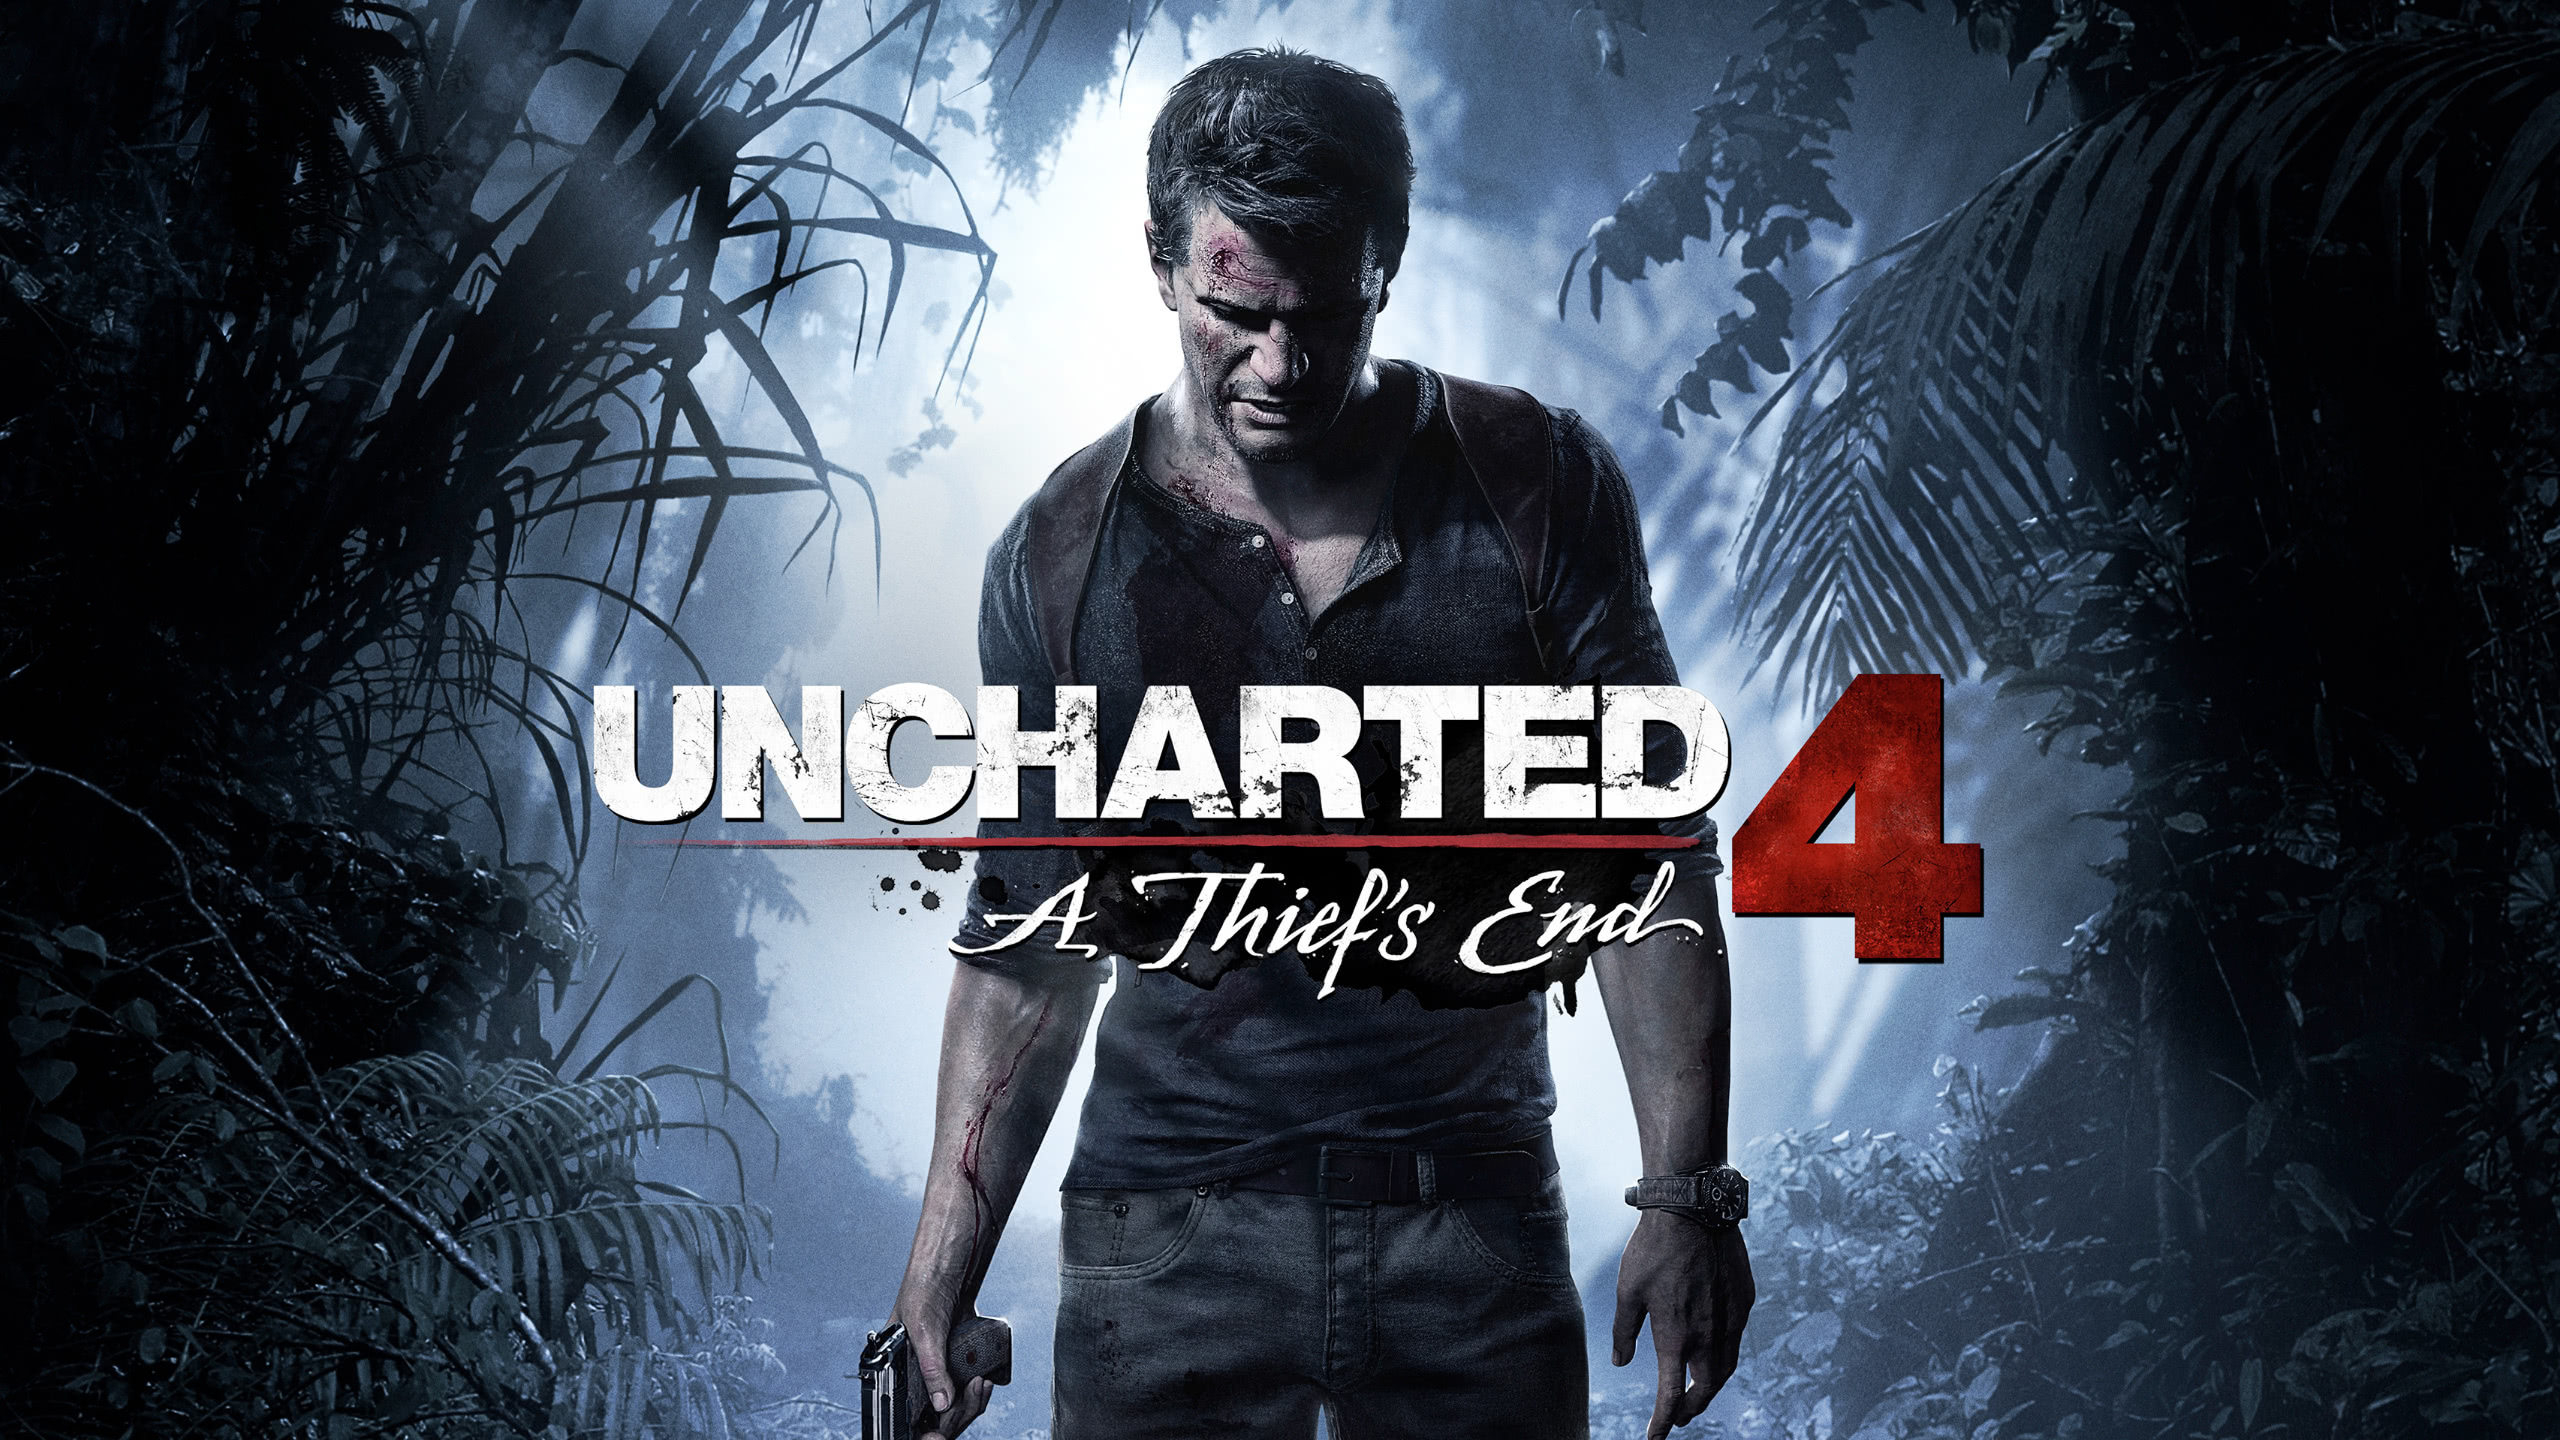 Uncharted 4 A Thiefs End PlayStation 4 uncharted HD wallpaper   Wallpaperbetter